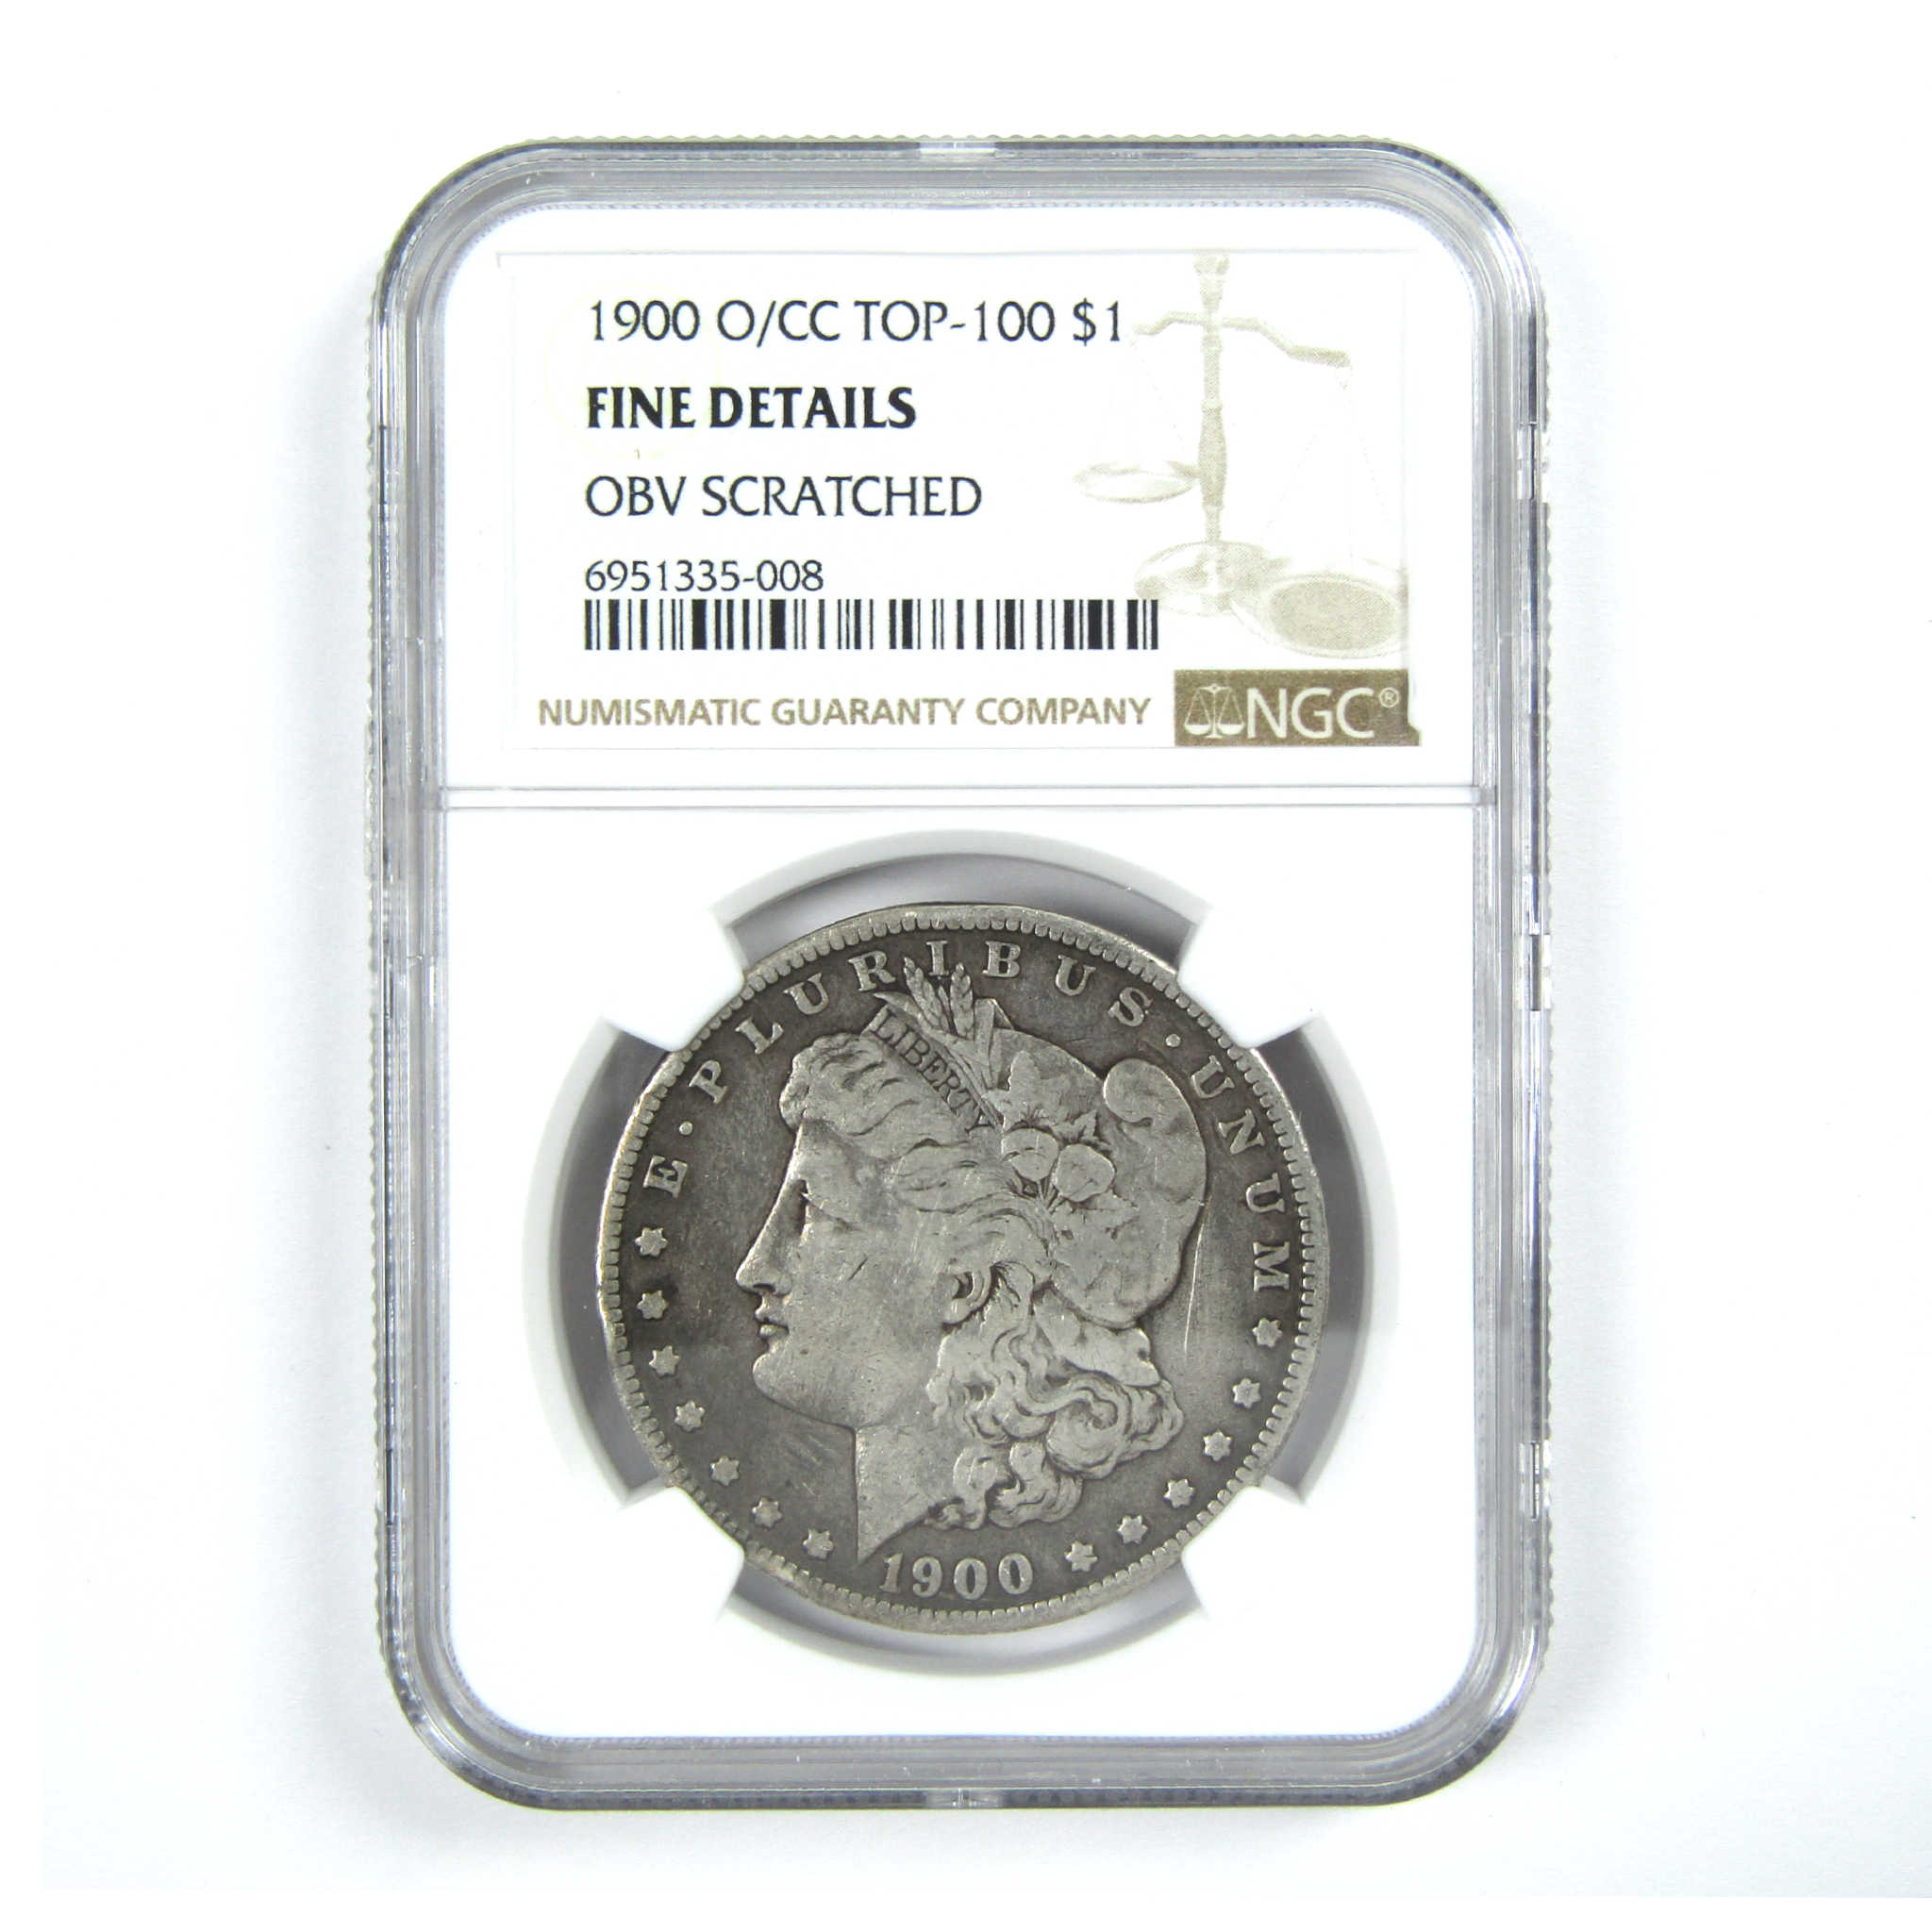 1900 O/CC Morgan Dollar F Fine Details NGC Silver $1 Coin SKU:I13223 - Morgan coin - Morgan silver dollar - Morgan silver dollar for sale - Profile Coins &amp; Collectibles